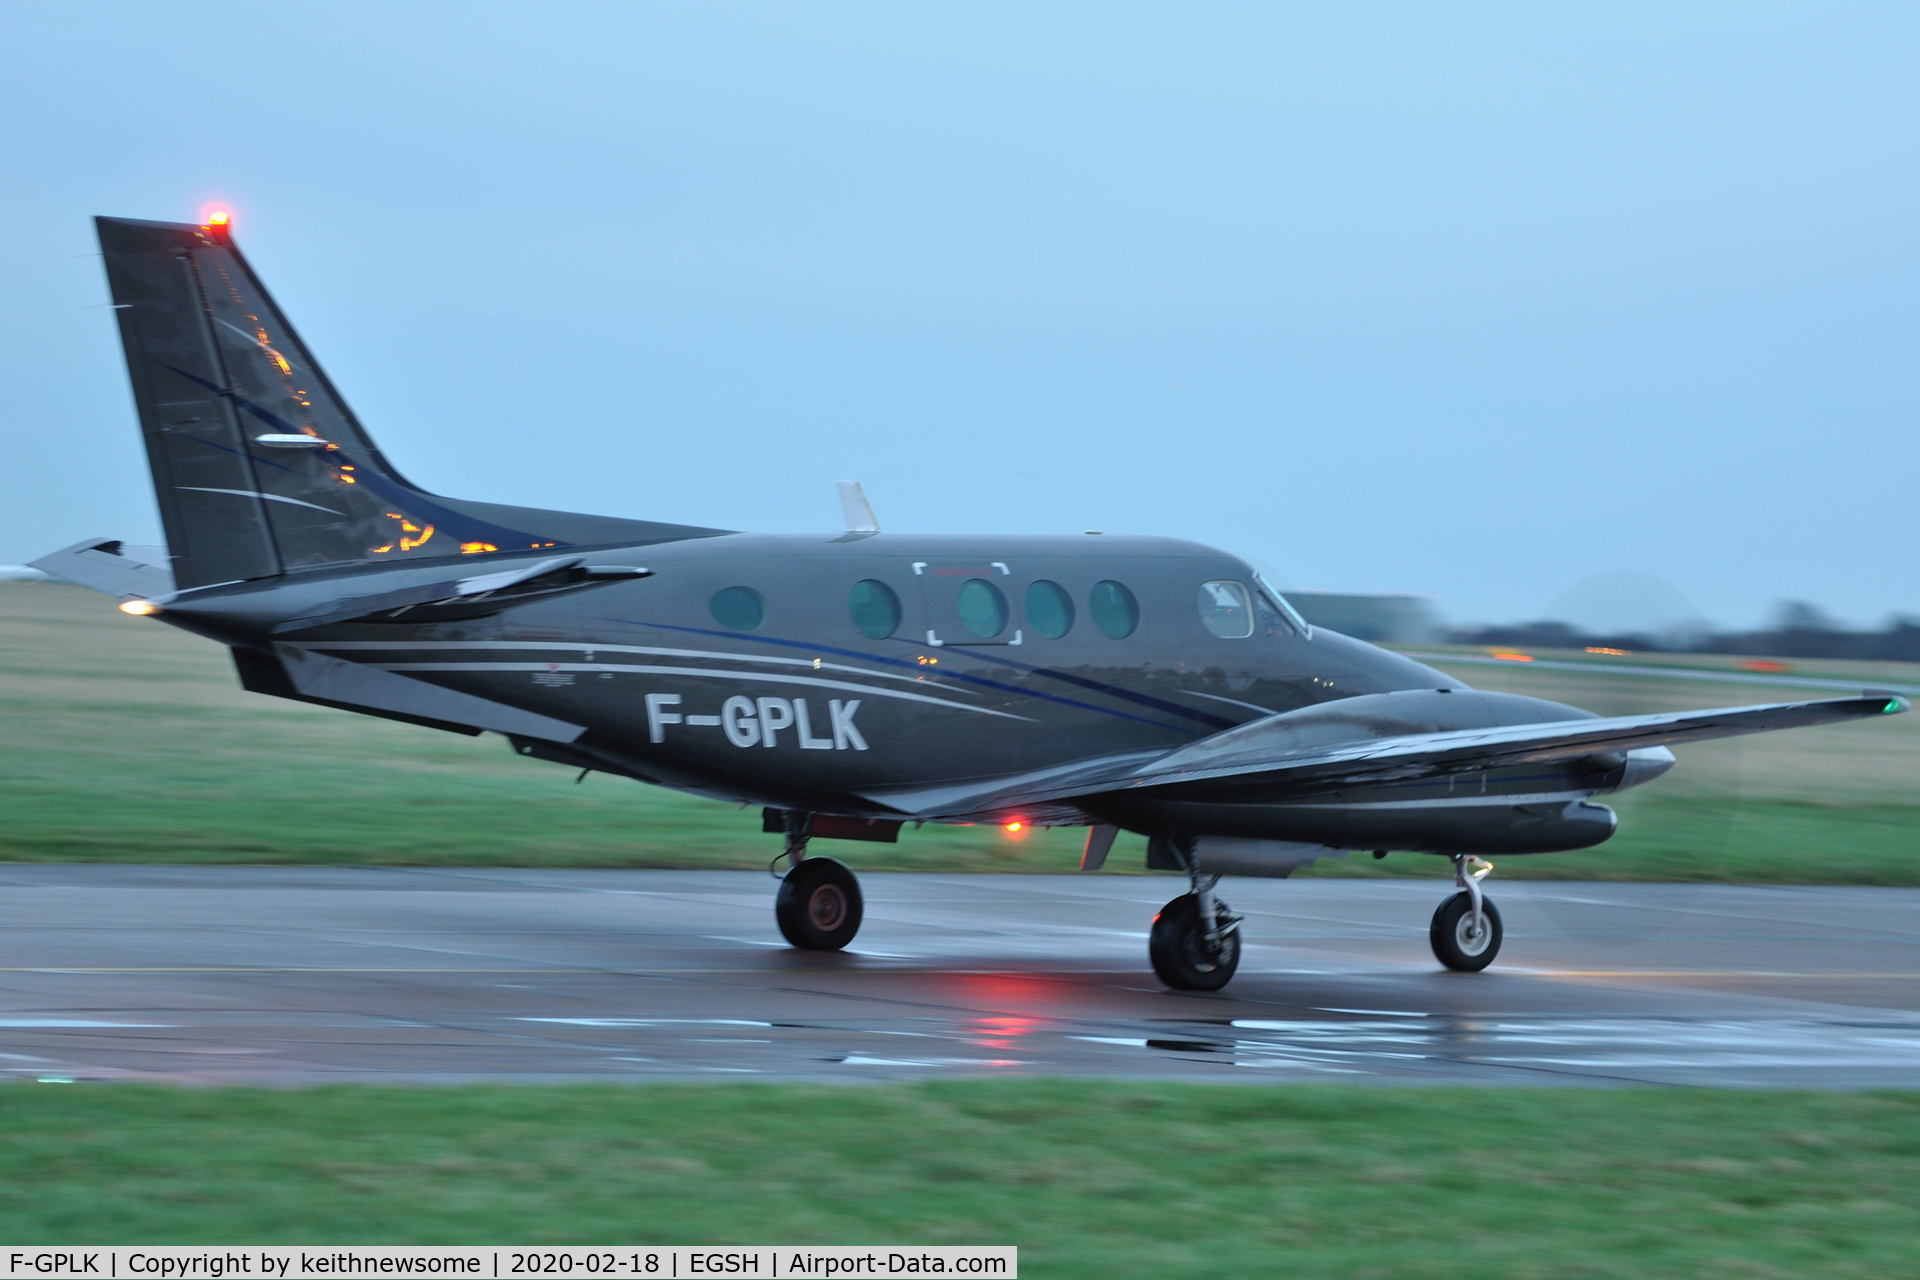 F-GPLK, 1995 Beech C90A King Air King Air C/N LJ-1391, Leaving wet Norwich for Toulouse, France.